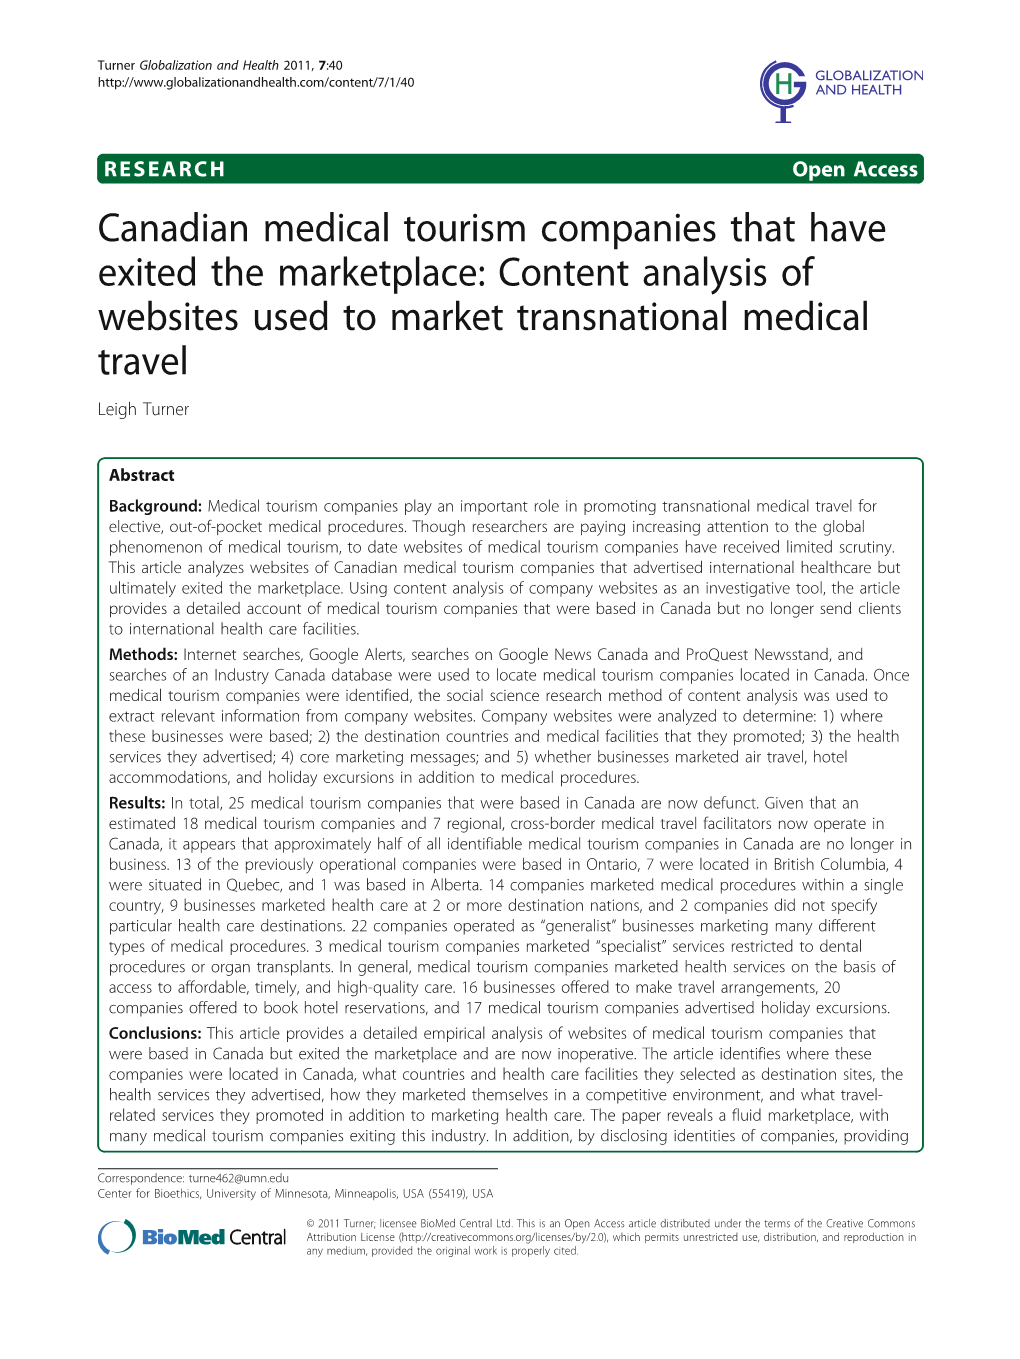 Canadian Medical Tourism Companies That Have Exited the Marketplace: Content Analysis of Websites Used to Market Transnational Medical Travel Leigh Turner